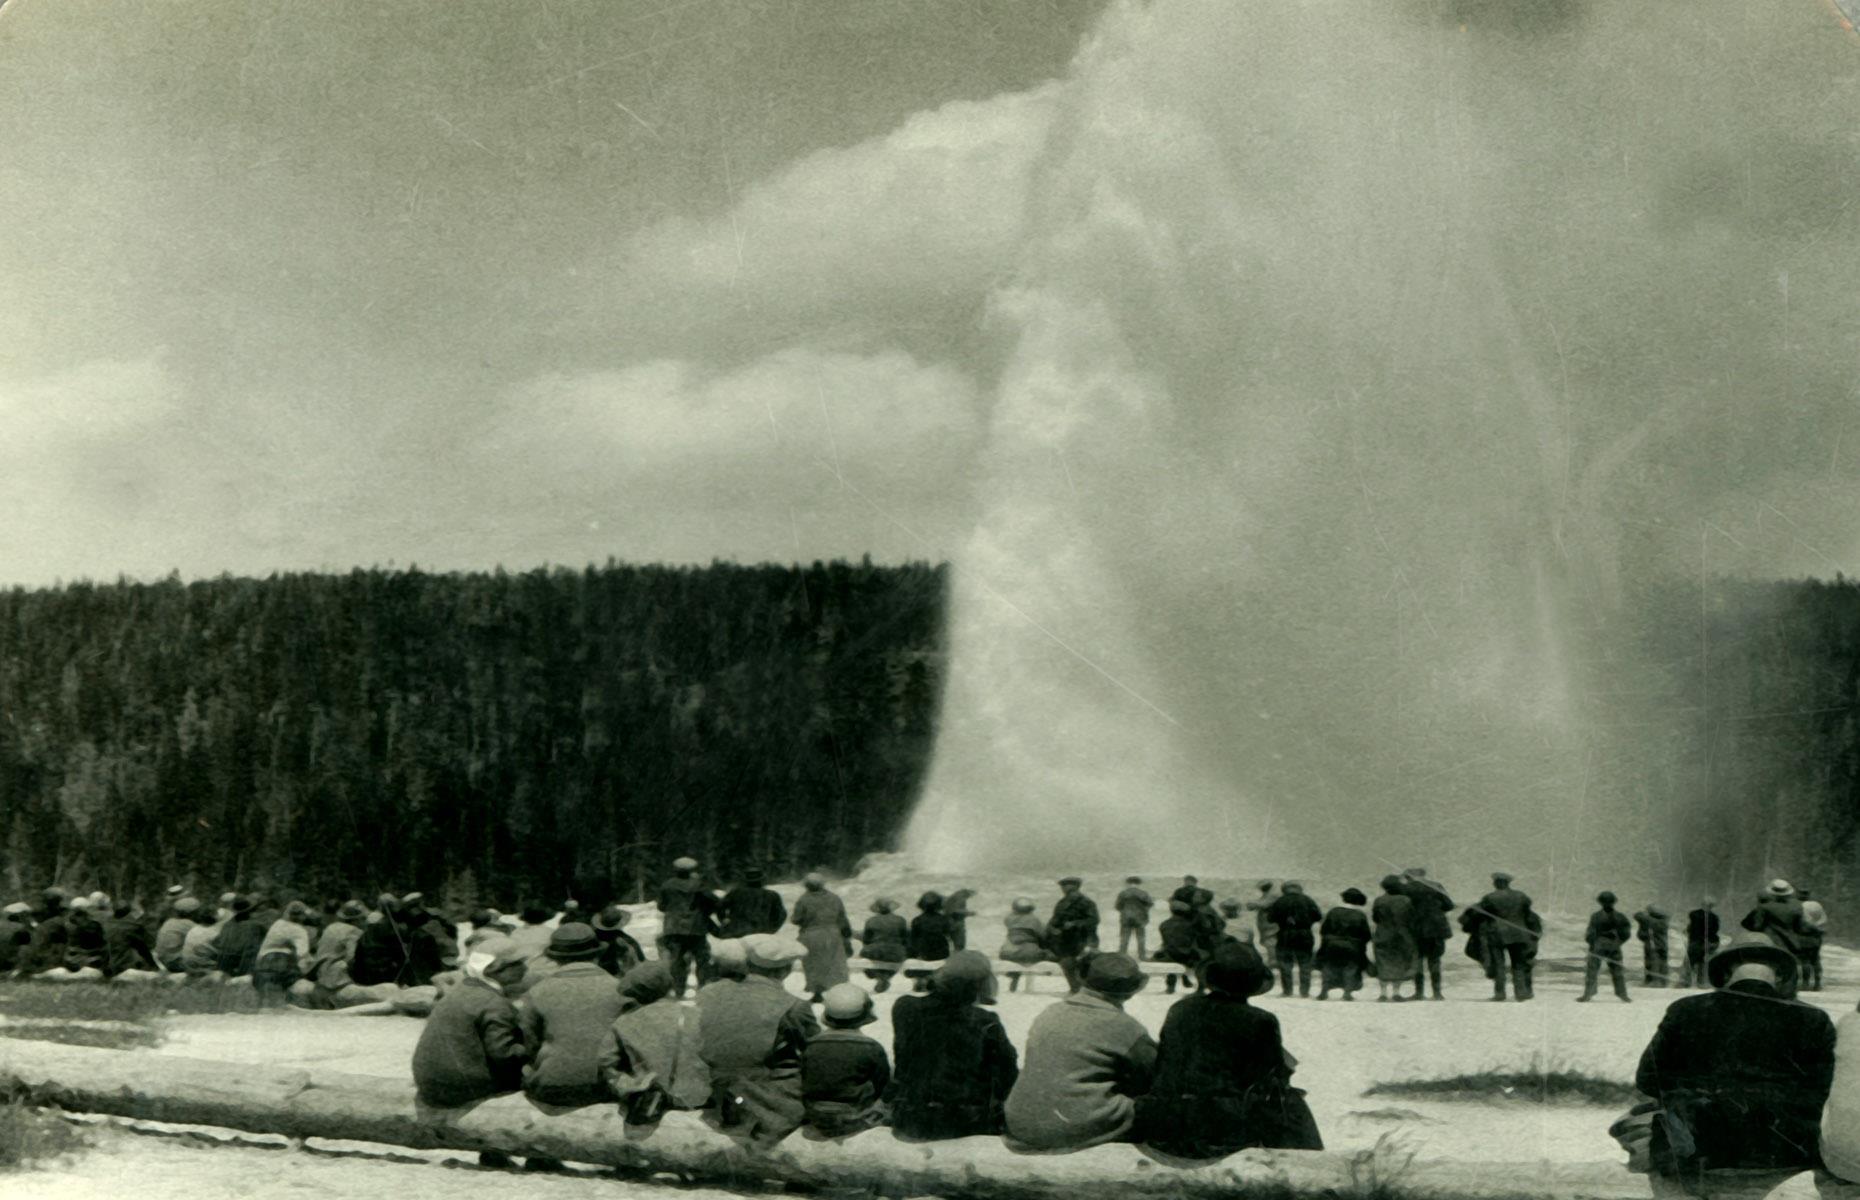 Back in the 1930s, safety protocols were significantly more lax than they are today. Nowadays, wooden boardwalks typically mark safe routes around Yellowstone's sizzling geothermal sites. But in this photo from 1930, you can see tourists standing moments from Old Faithful as it dramatically erupts. More cautious spectators sit on a fallen tree trunk behind them.